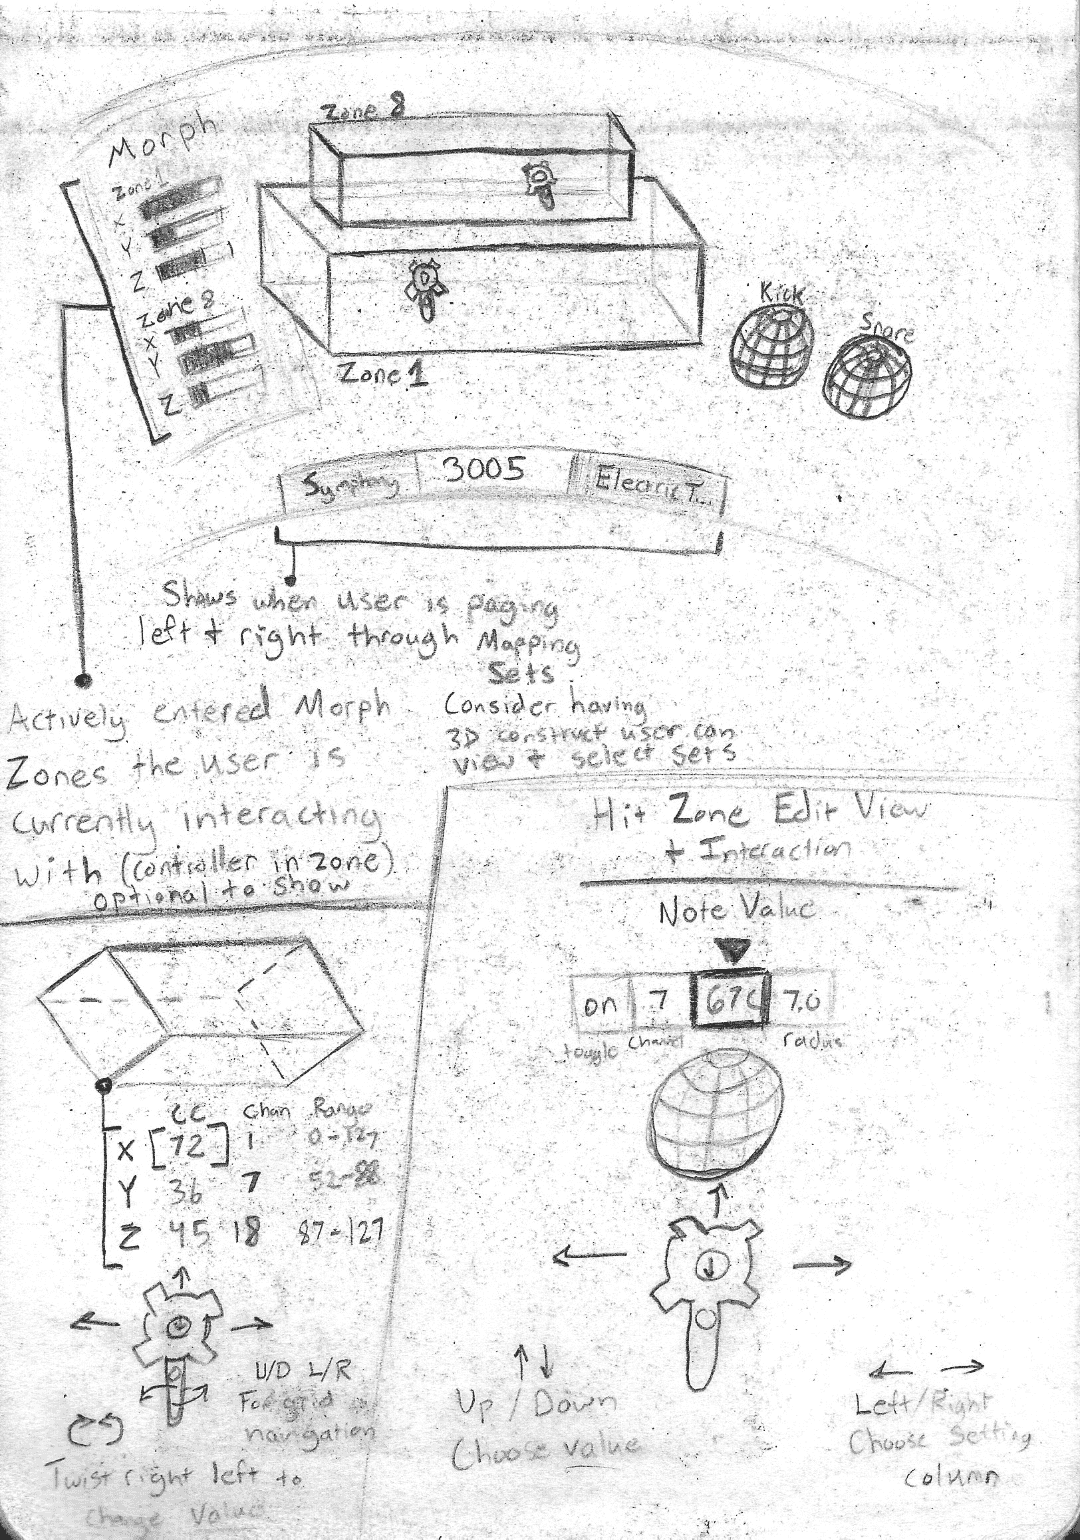 A hand-drawn sketch depicting a UI concept of MoveMusic VR software. It shows VR controllers interacting with 3D rectangular prisms and spheres and shows floating UI settings and a HUD showing the user their current workspace of controls. It also explores gesture interactions for setting MIDI values.